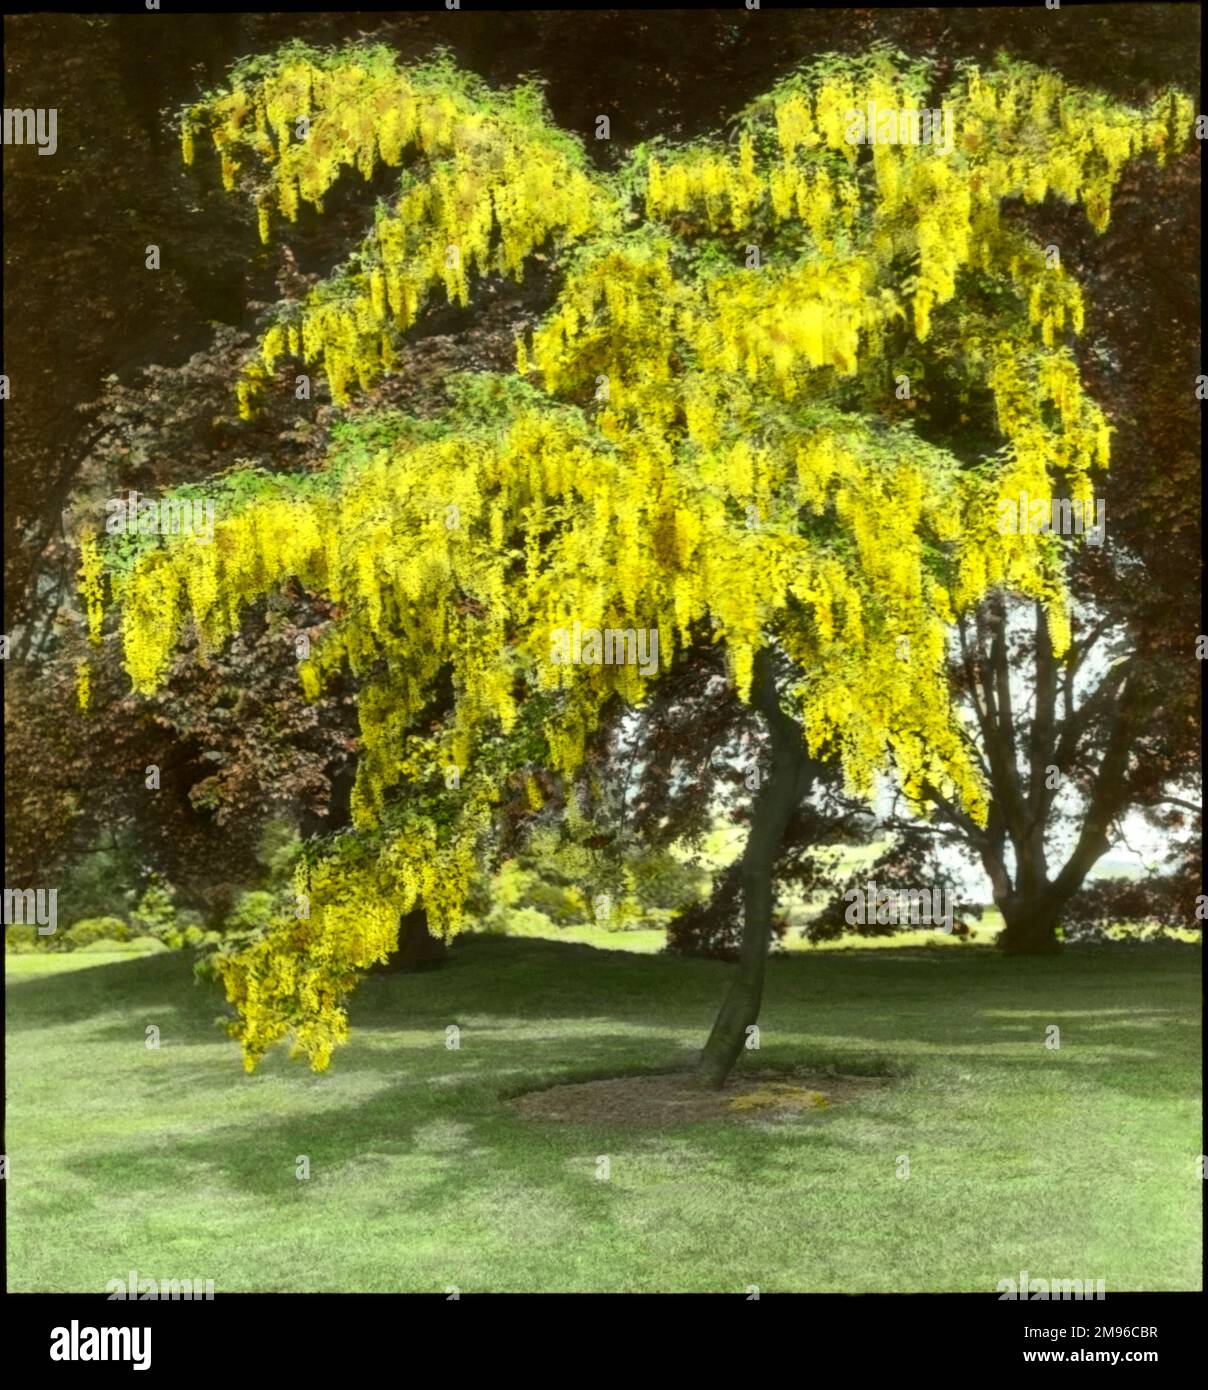 A Laburnum (Golden Chain) tree of the Fabaceae family, seen here in full flower (bright yellow), with a Copper Beech or Purple Beech (Fagus Sylvatica Purpurea) of the Fagaceae family in the background. Stock Photo